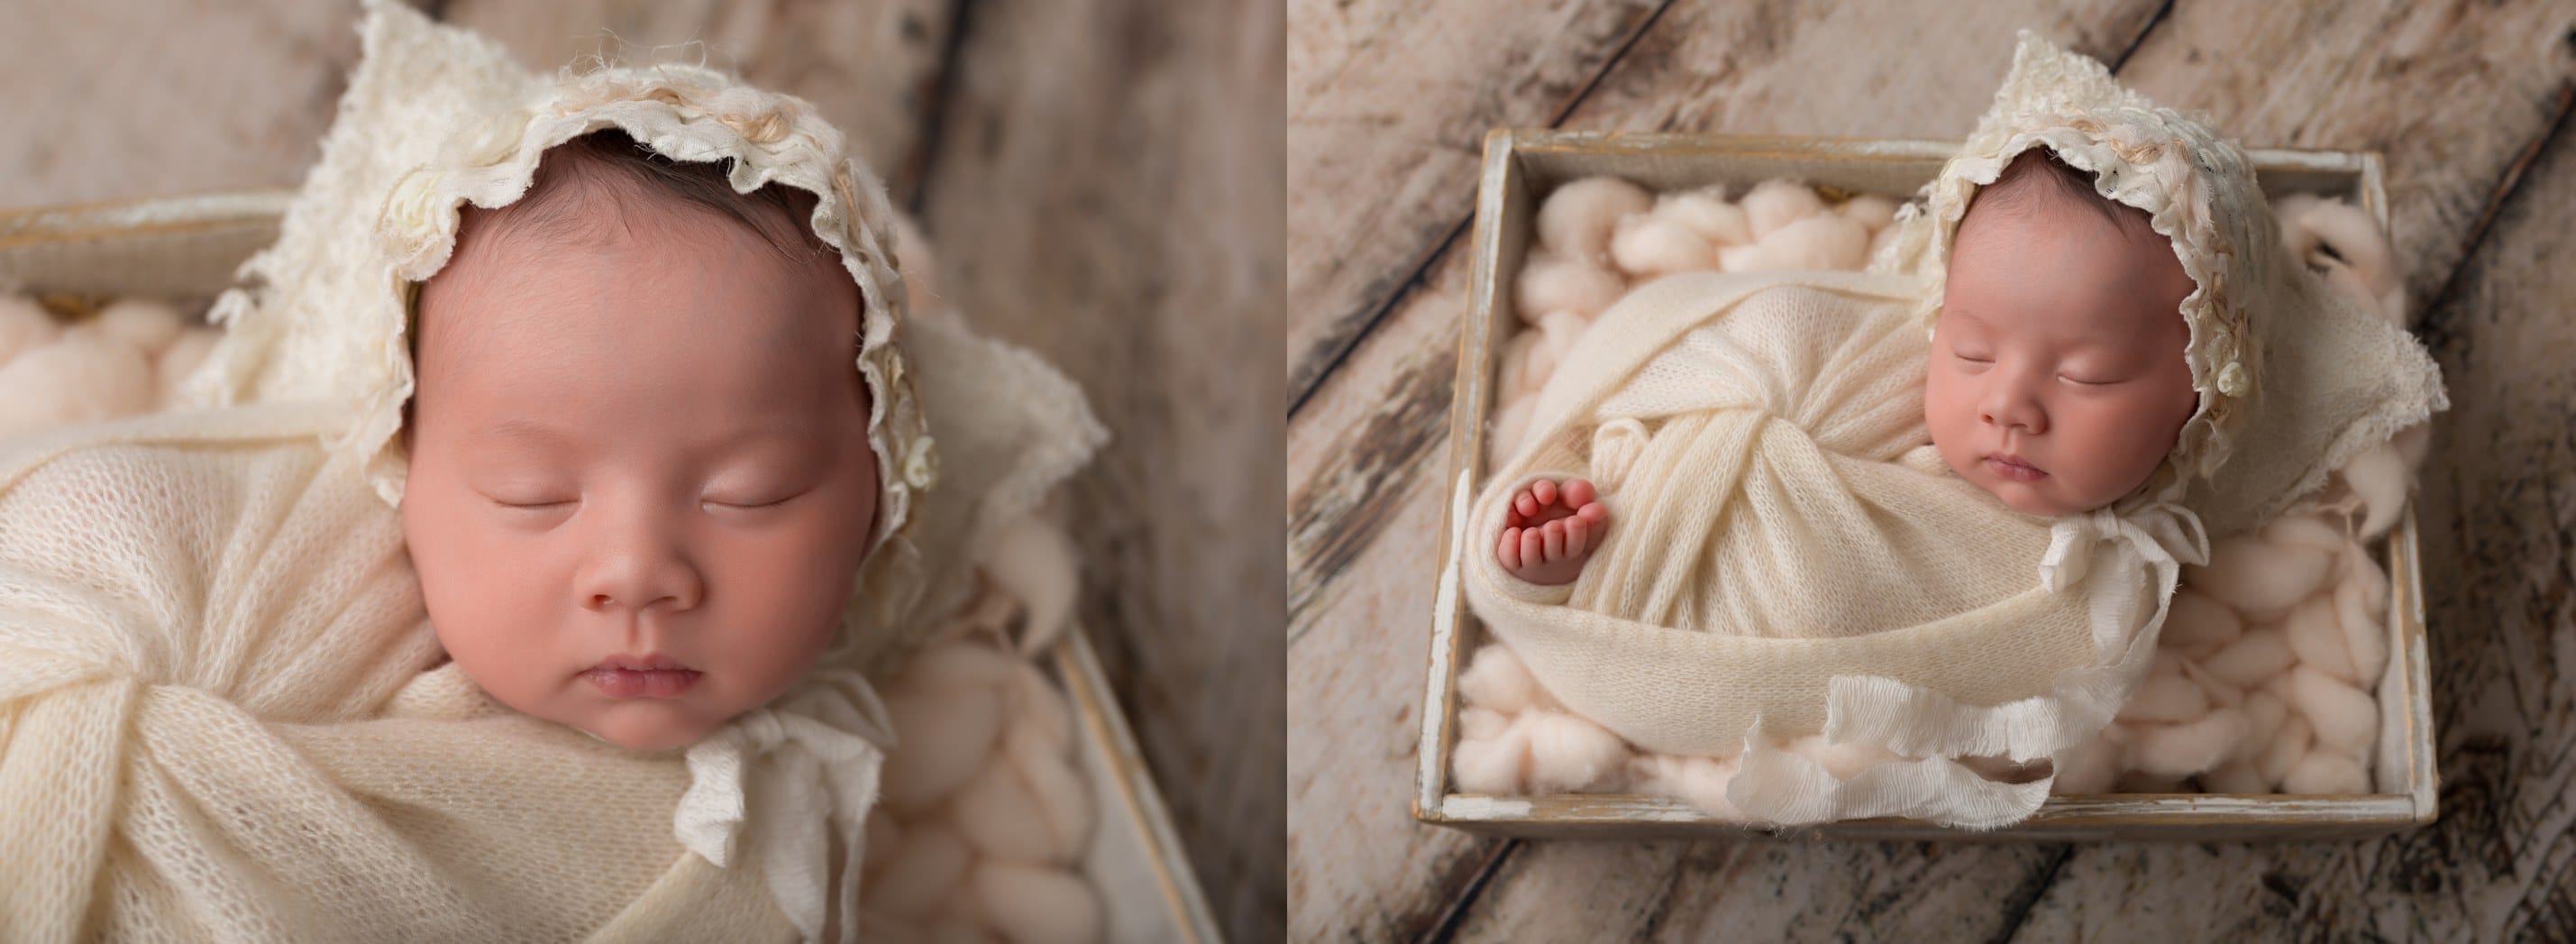 newborn baby girl in white lace bonnet during a los angeles photoshoot